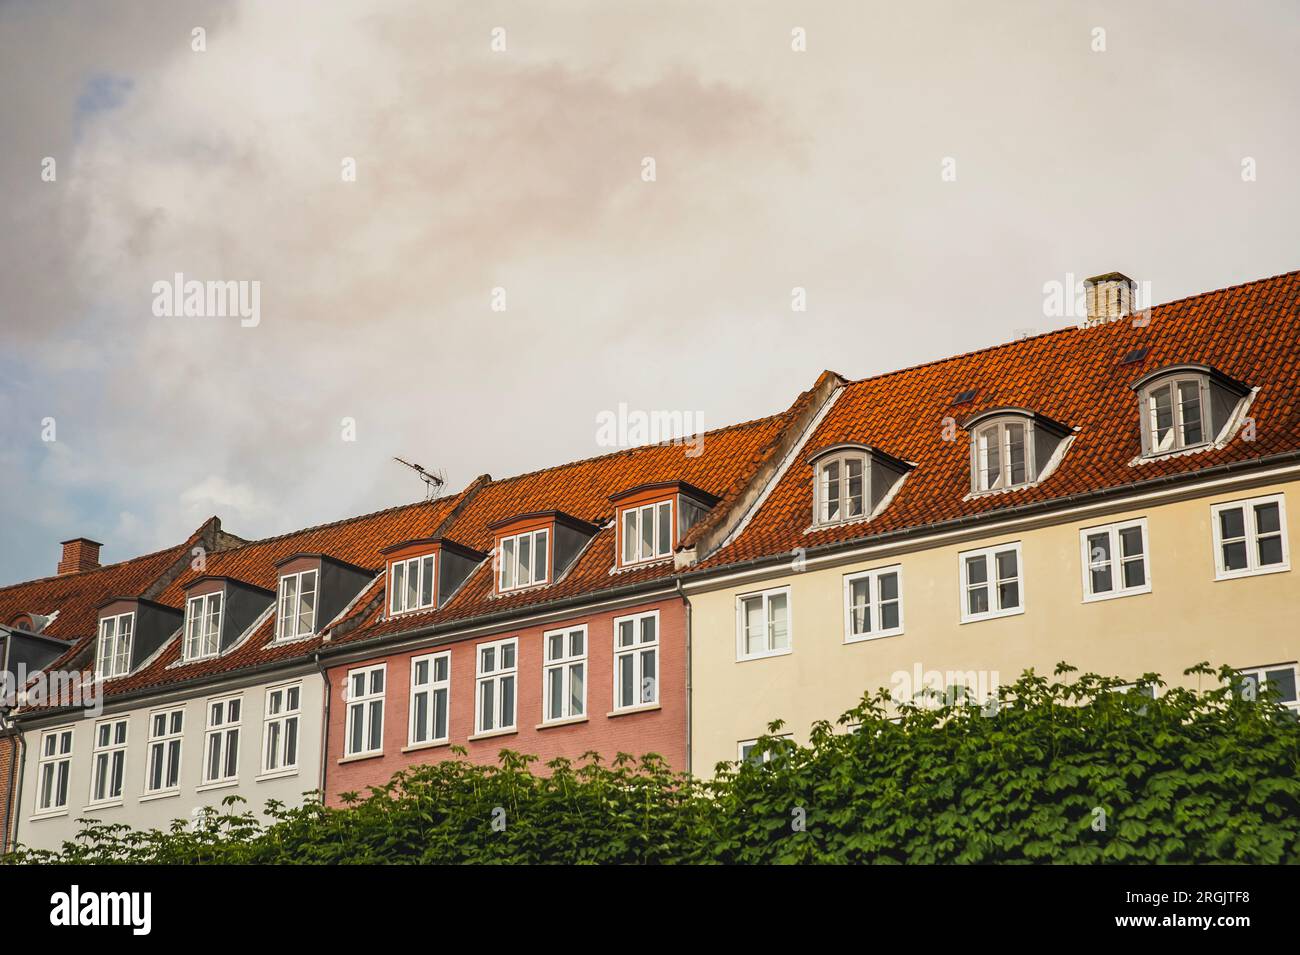 Danish neat architecture with 3 coloured buildings in a row, Copenhagen. Three houses lined up in show a Scandinavian urban design or architecture Stock Photo